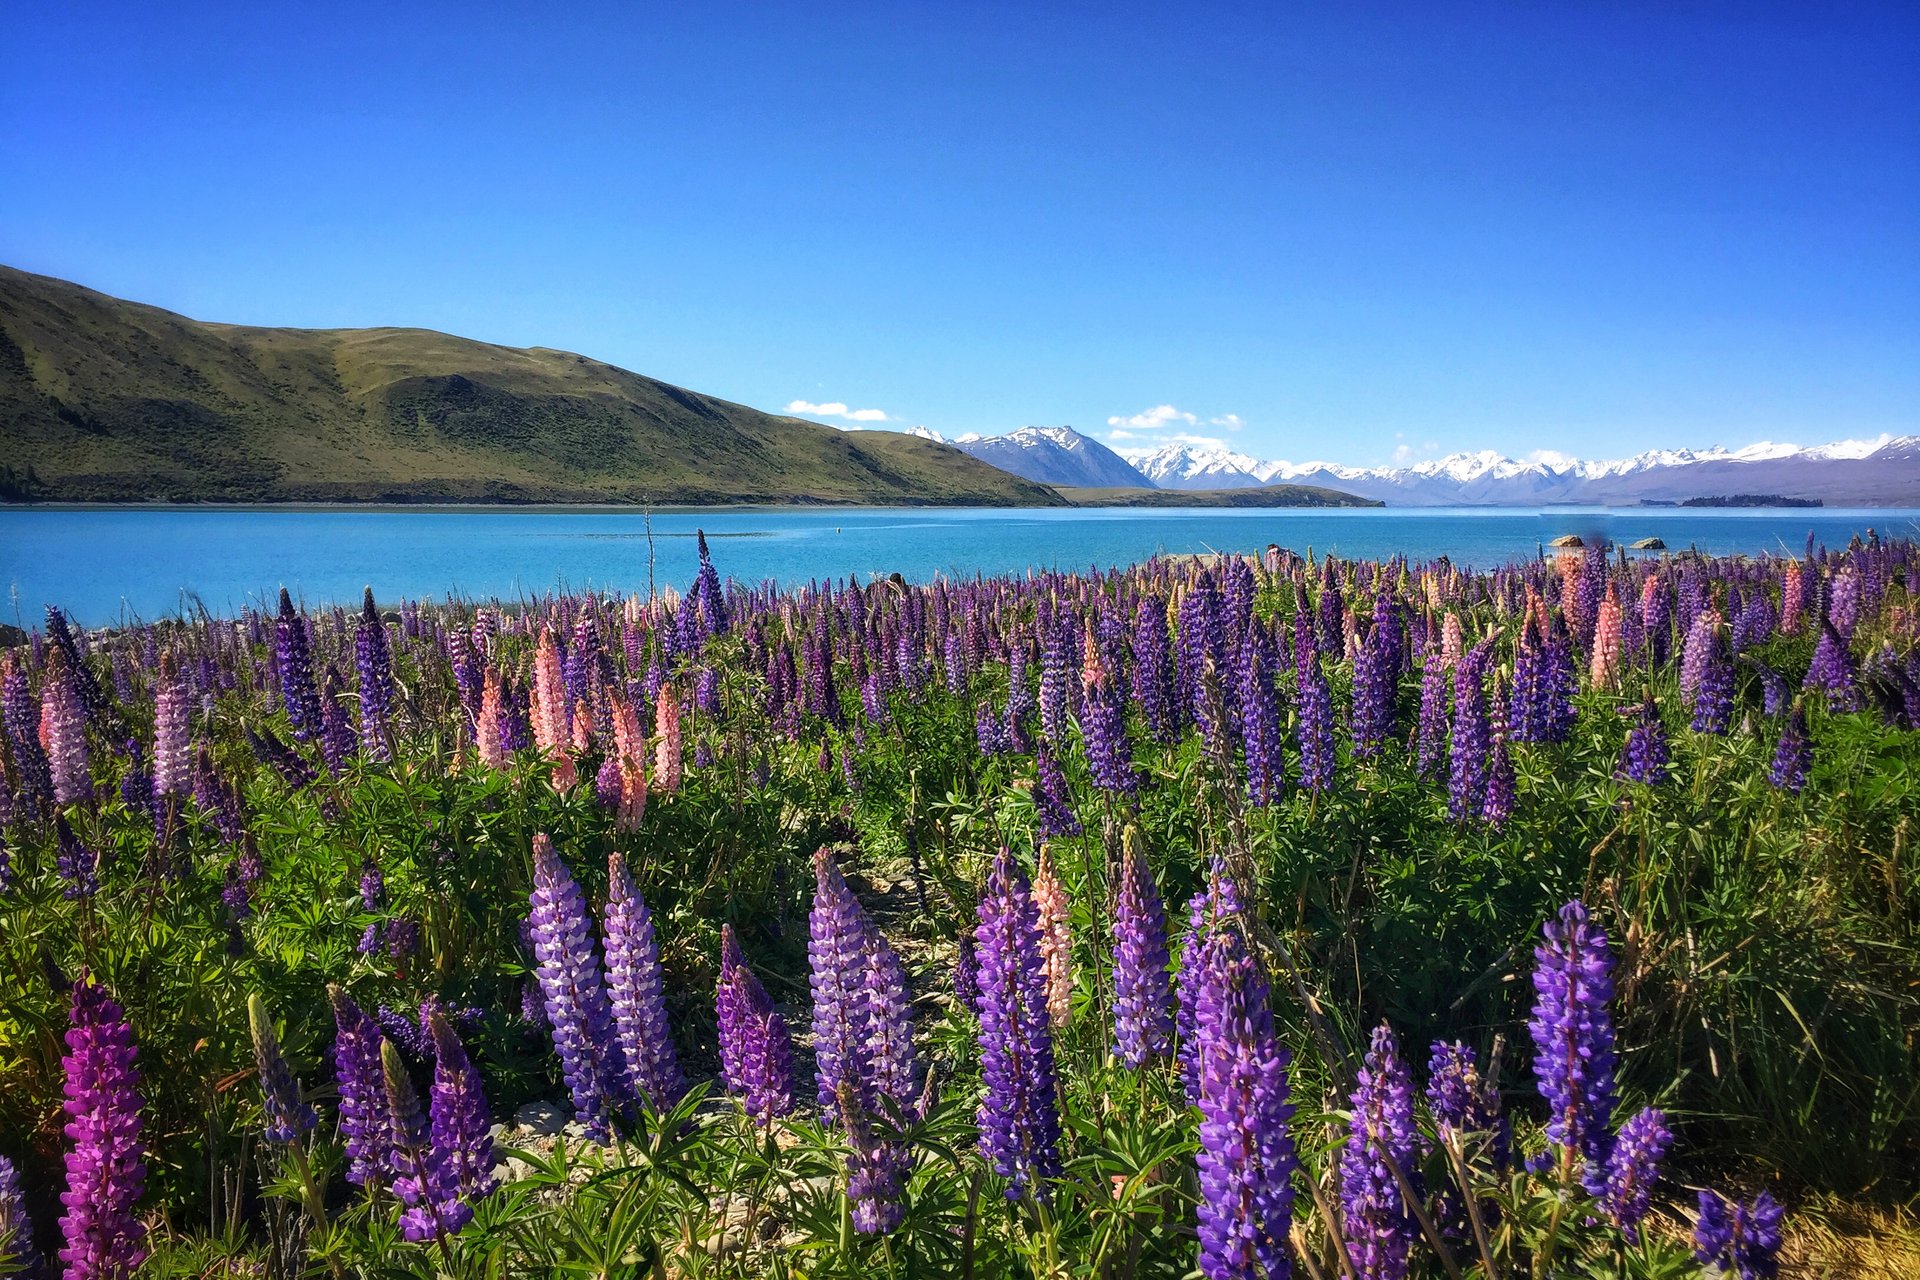 12-Day Southern Explorer Tour from Christchurch: A Boat Cruise to the Remote Mou Waho Island Nature Reserve | Stunning Southern Alps |  Māori culture | 